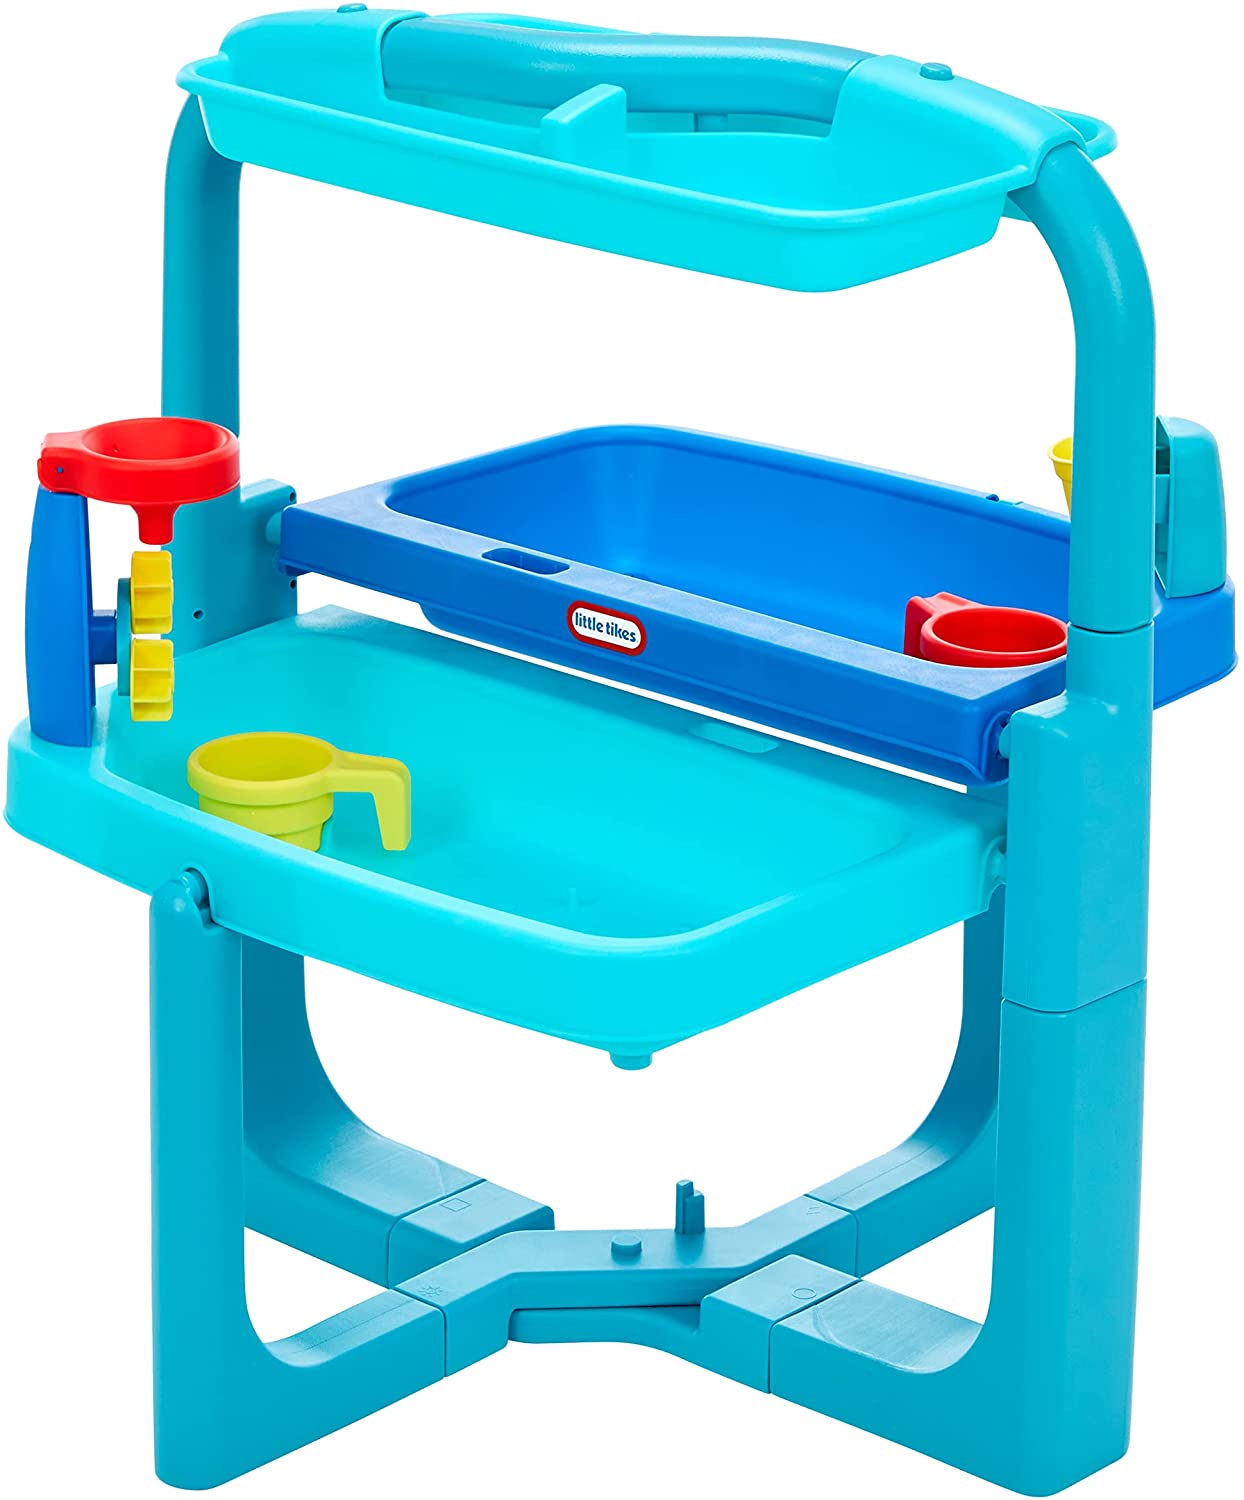 Little Tikes Easy Store Outdoor Folding Water Play Table